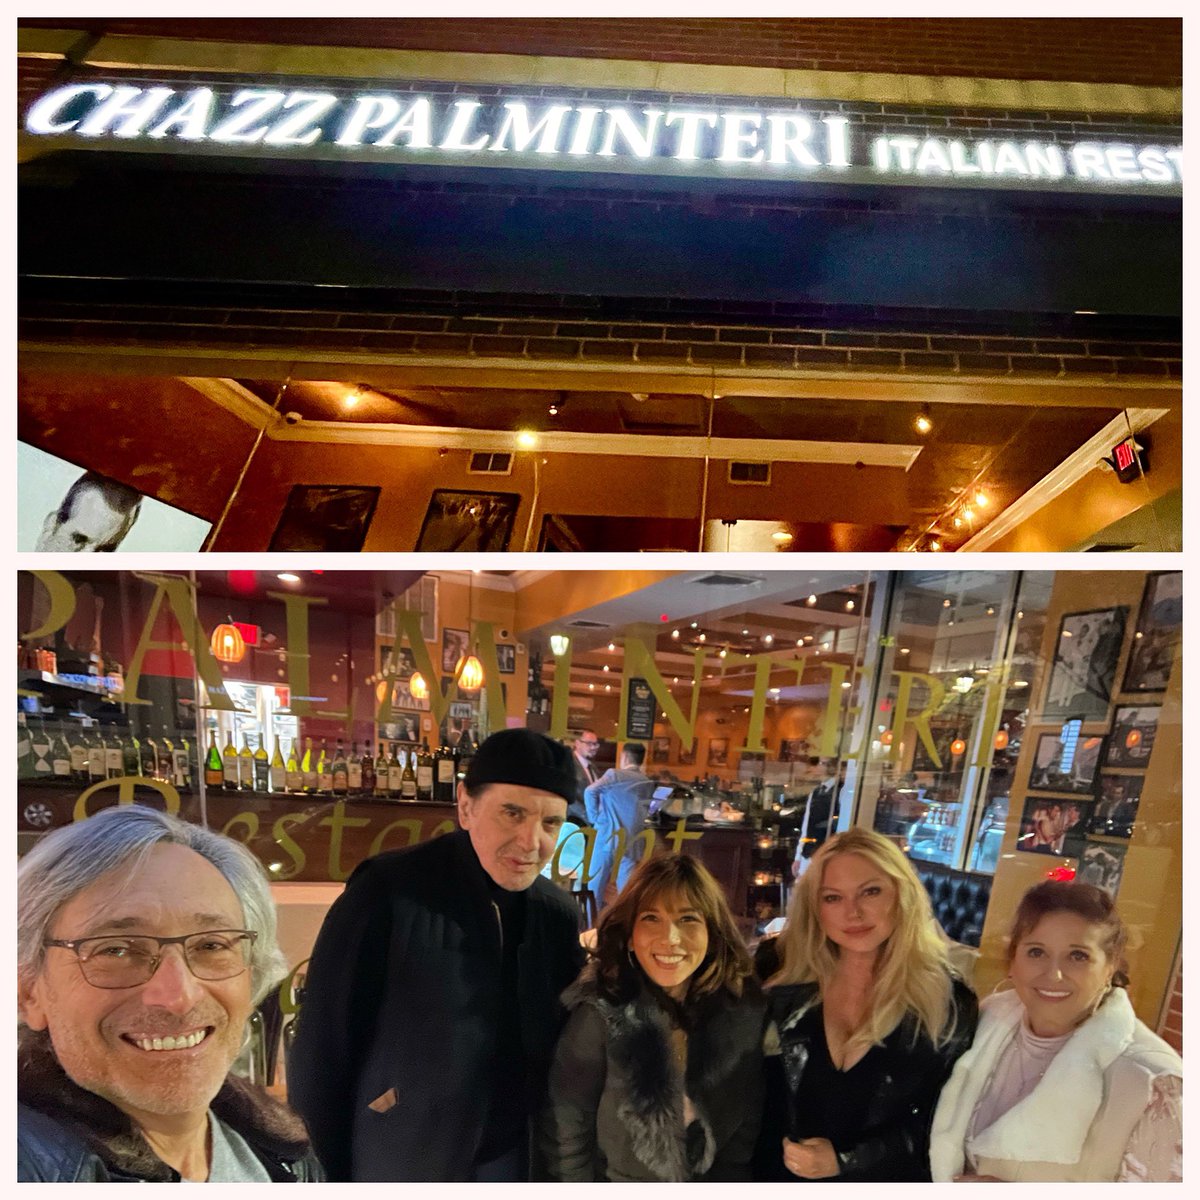 Fab dinner with the best of friends @chazzpalminteri @giannapalminteri at Chazz Palminteri Italian Restaurant